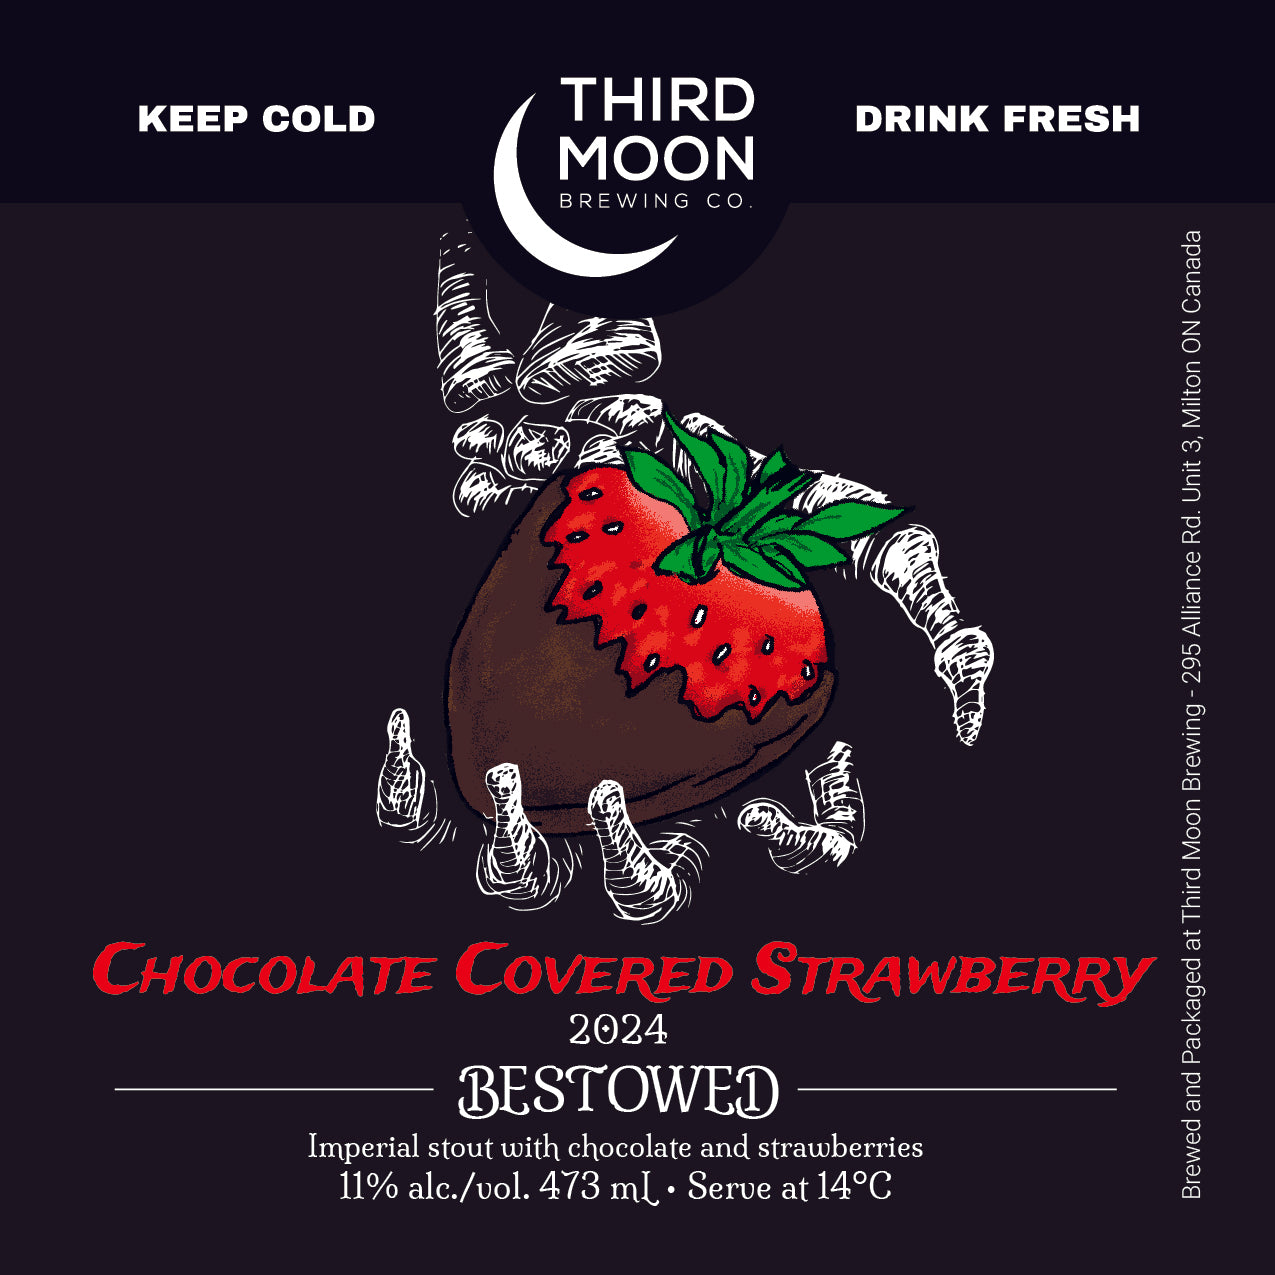 Imperial Stout - "Chocolate Covered Strawberry Bestowed" tall can